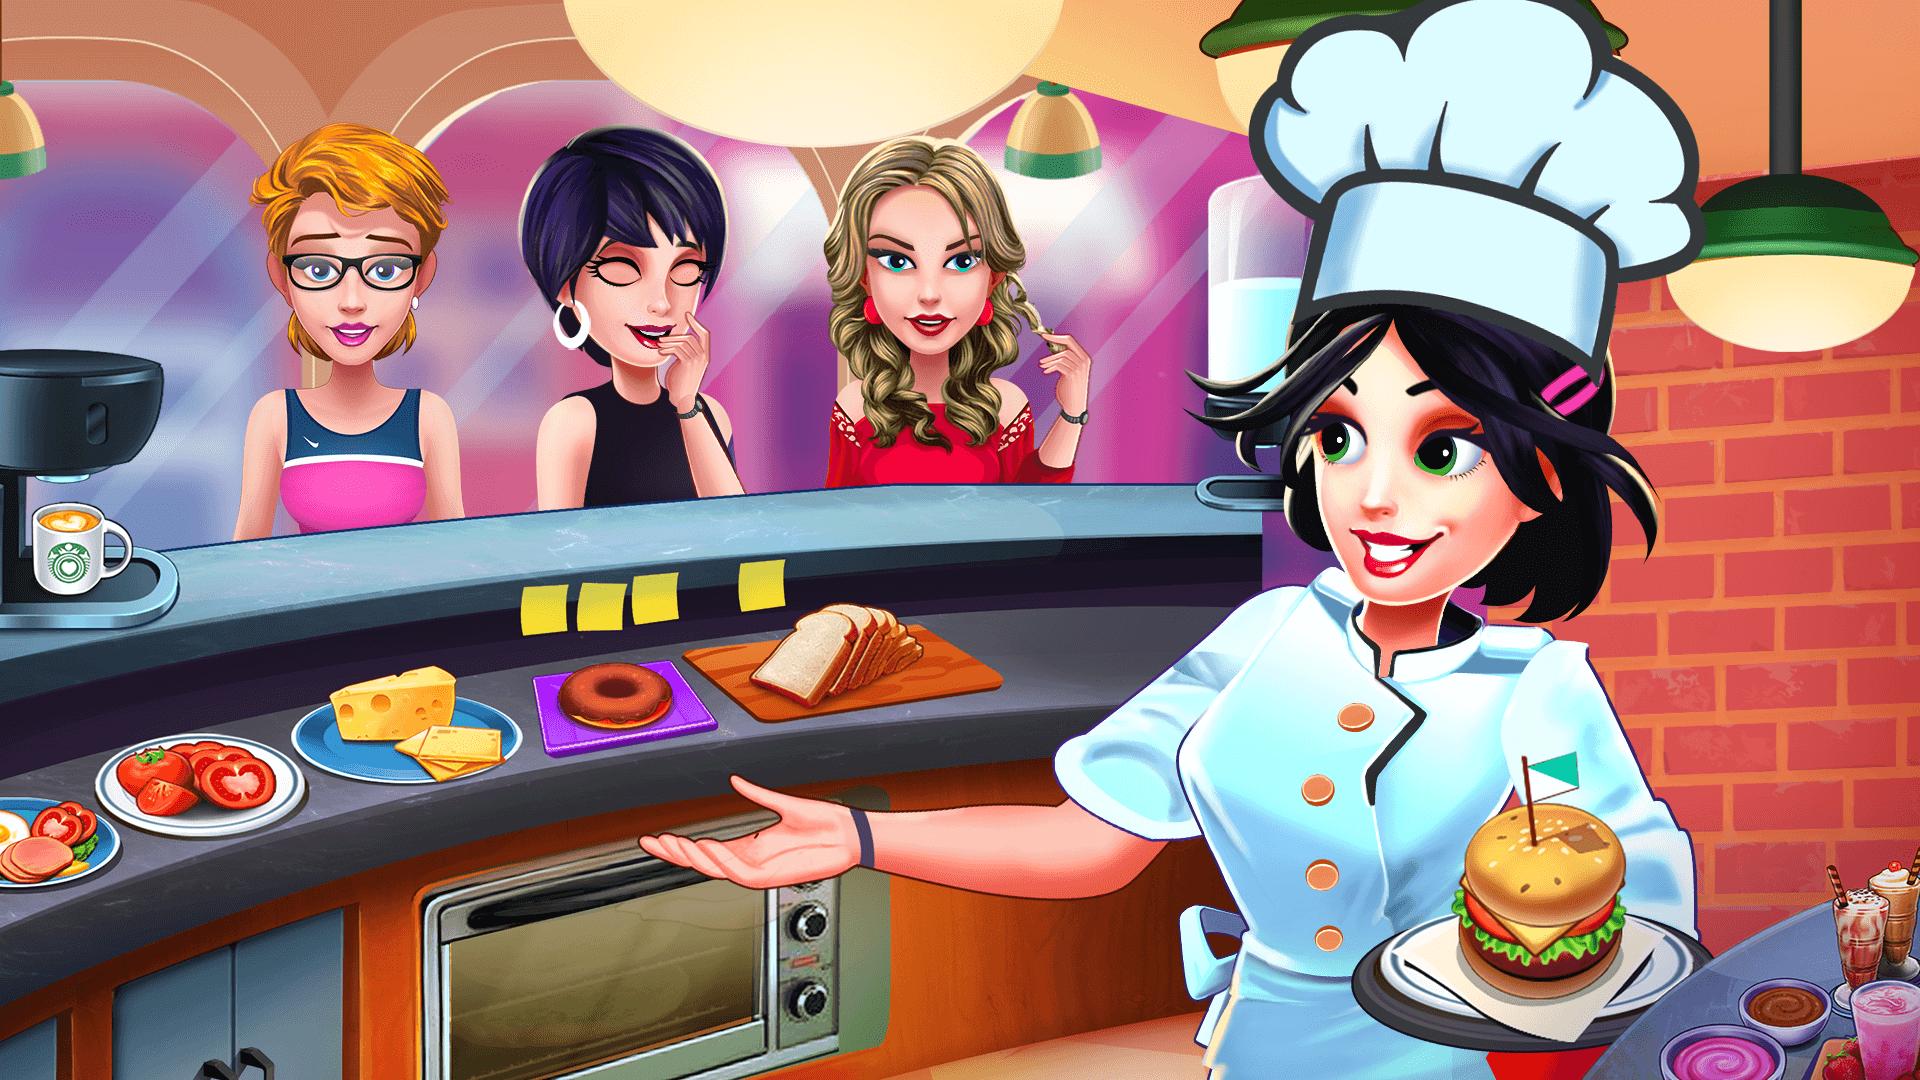 Cooking Cafe - Food Chef_playmods.net